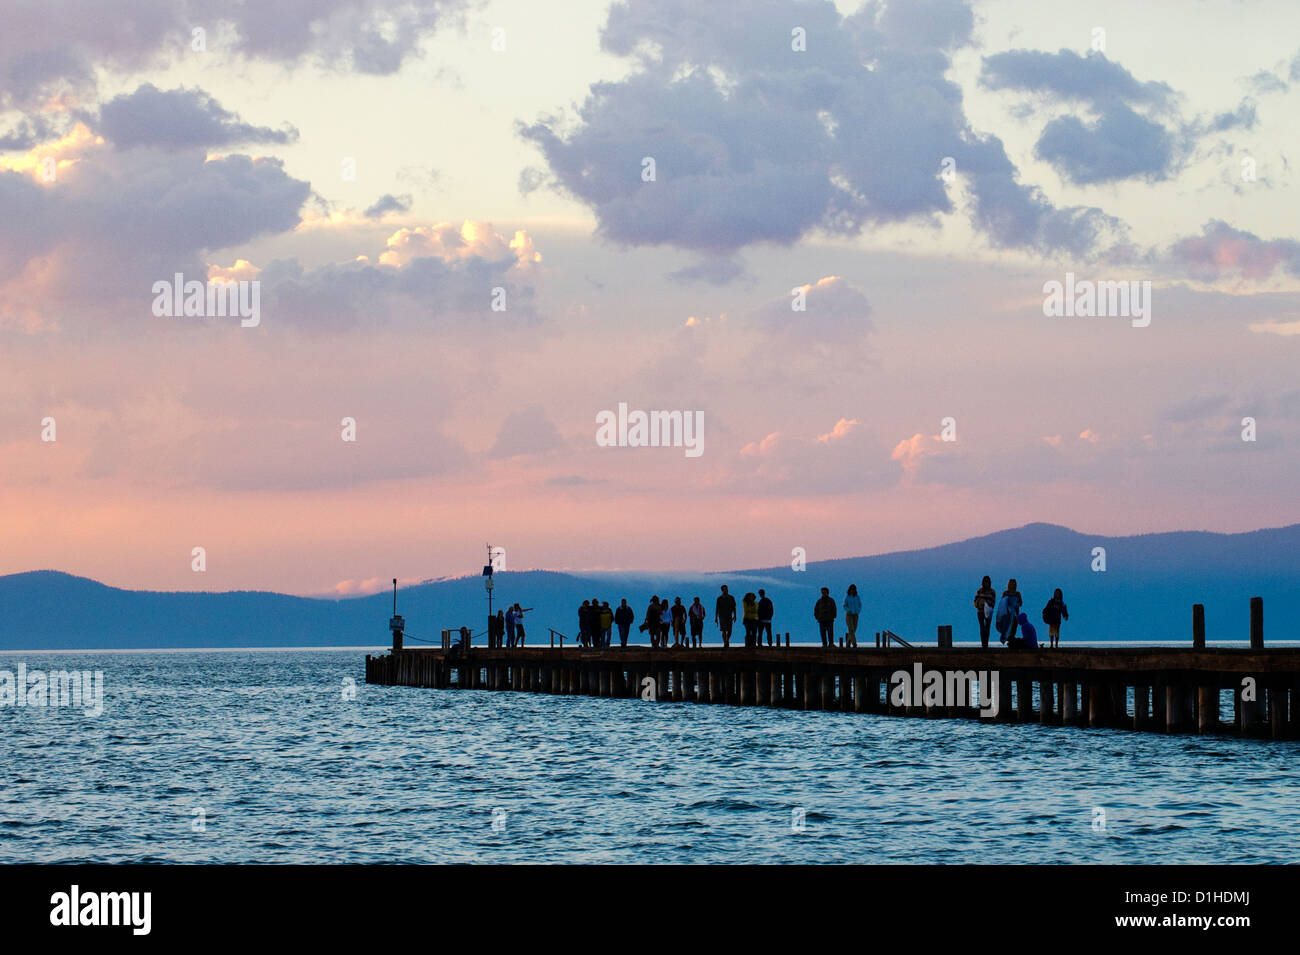 A silhouette of people enjoying a beautiful sunset from a pier in South Lake Tahoe, CA. Stock Photo